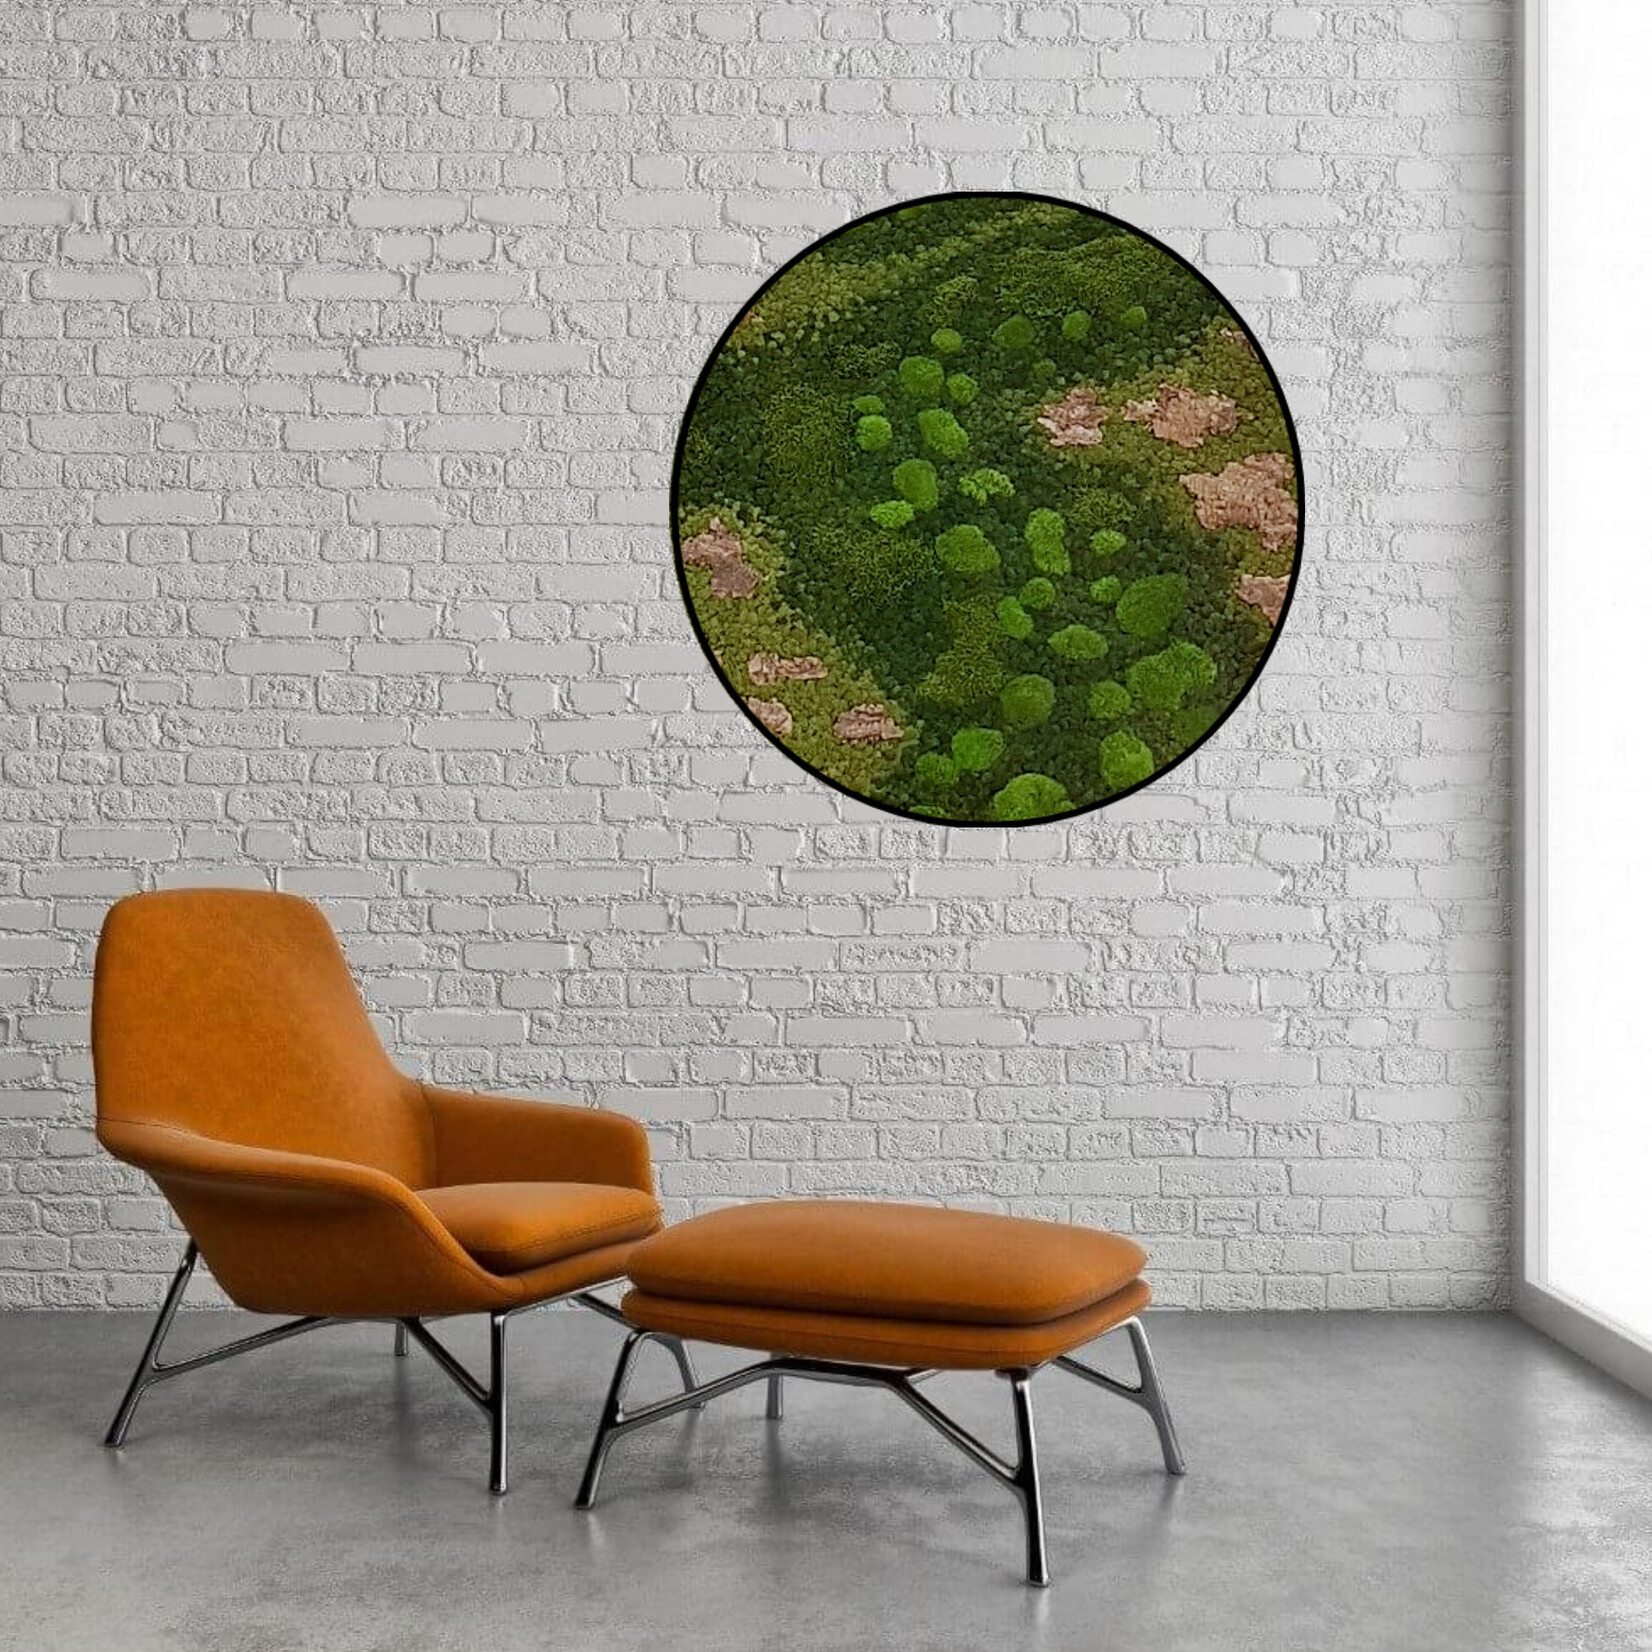 Moss Painting Lost World